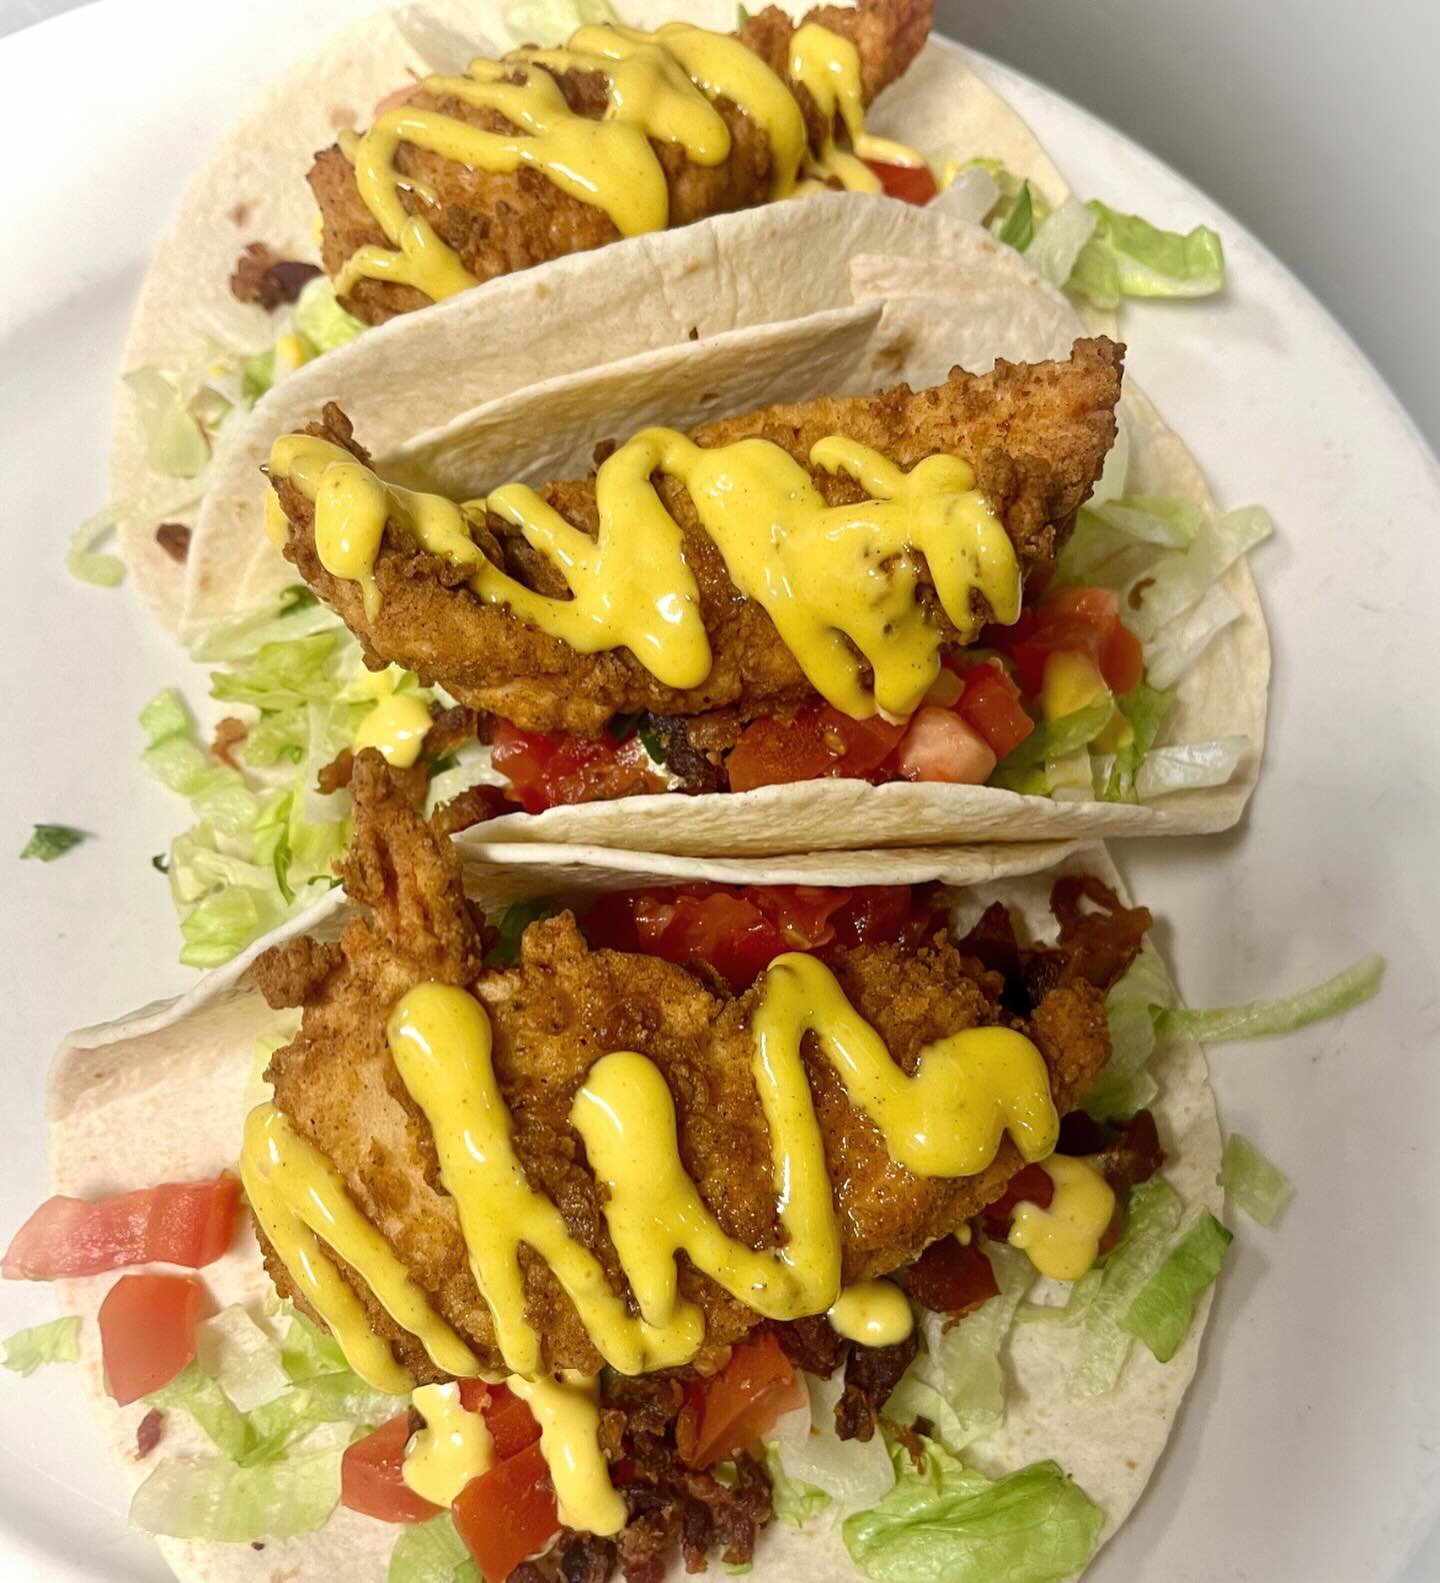 .
Fried Chicken BLT Tacos 😊😊
&mdash;3 flour tortillas filled with Fried Chicken Strips, lettuce, tomato, and Bacon. Drizzled with Honey Mustard and served with your choice of a side! 

⭐️ This will be our Taco Special all weekend. Open 11:30-10:00 